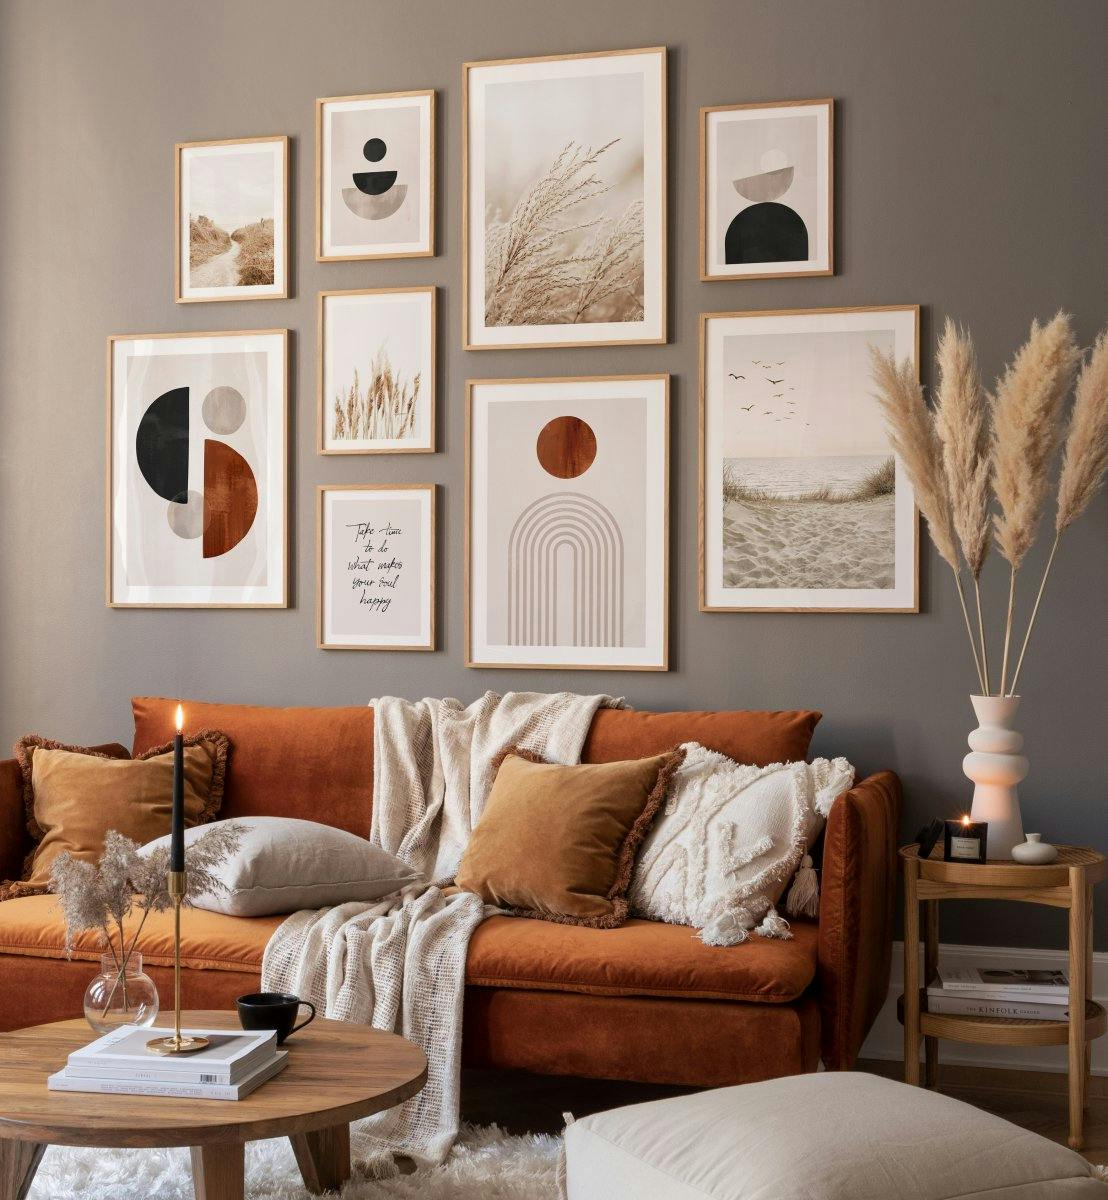 Graphic illustrations combined with nature prints and quotes for living room